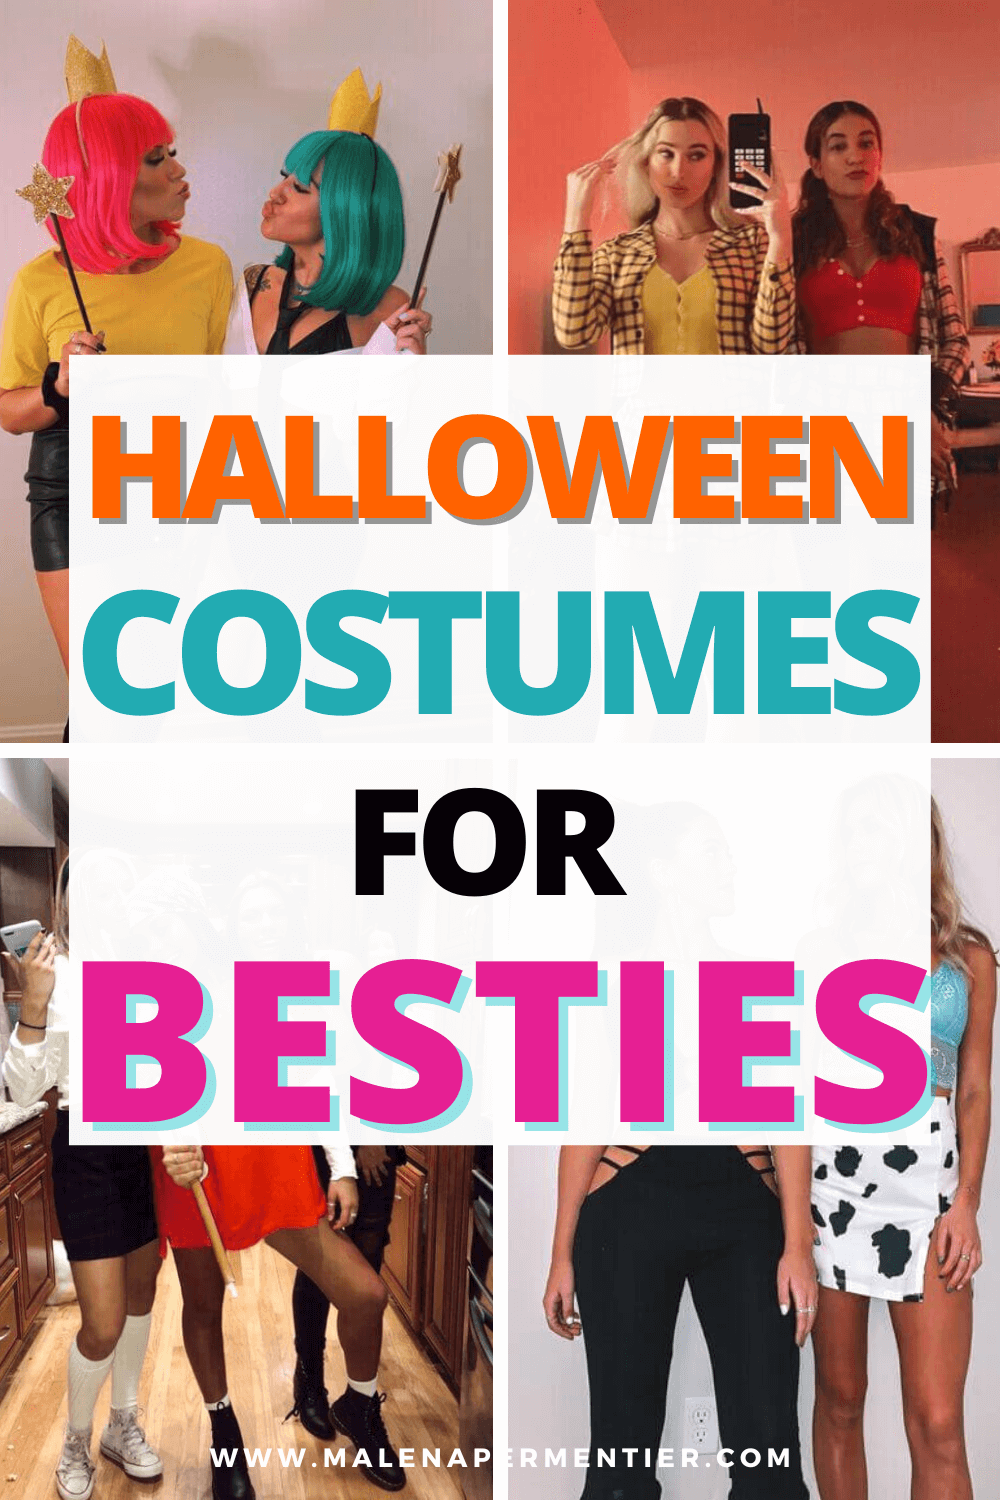 21 Cute Halloween Costumes for Best Friends (You Will Obsess Over!)